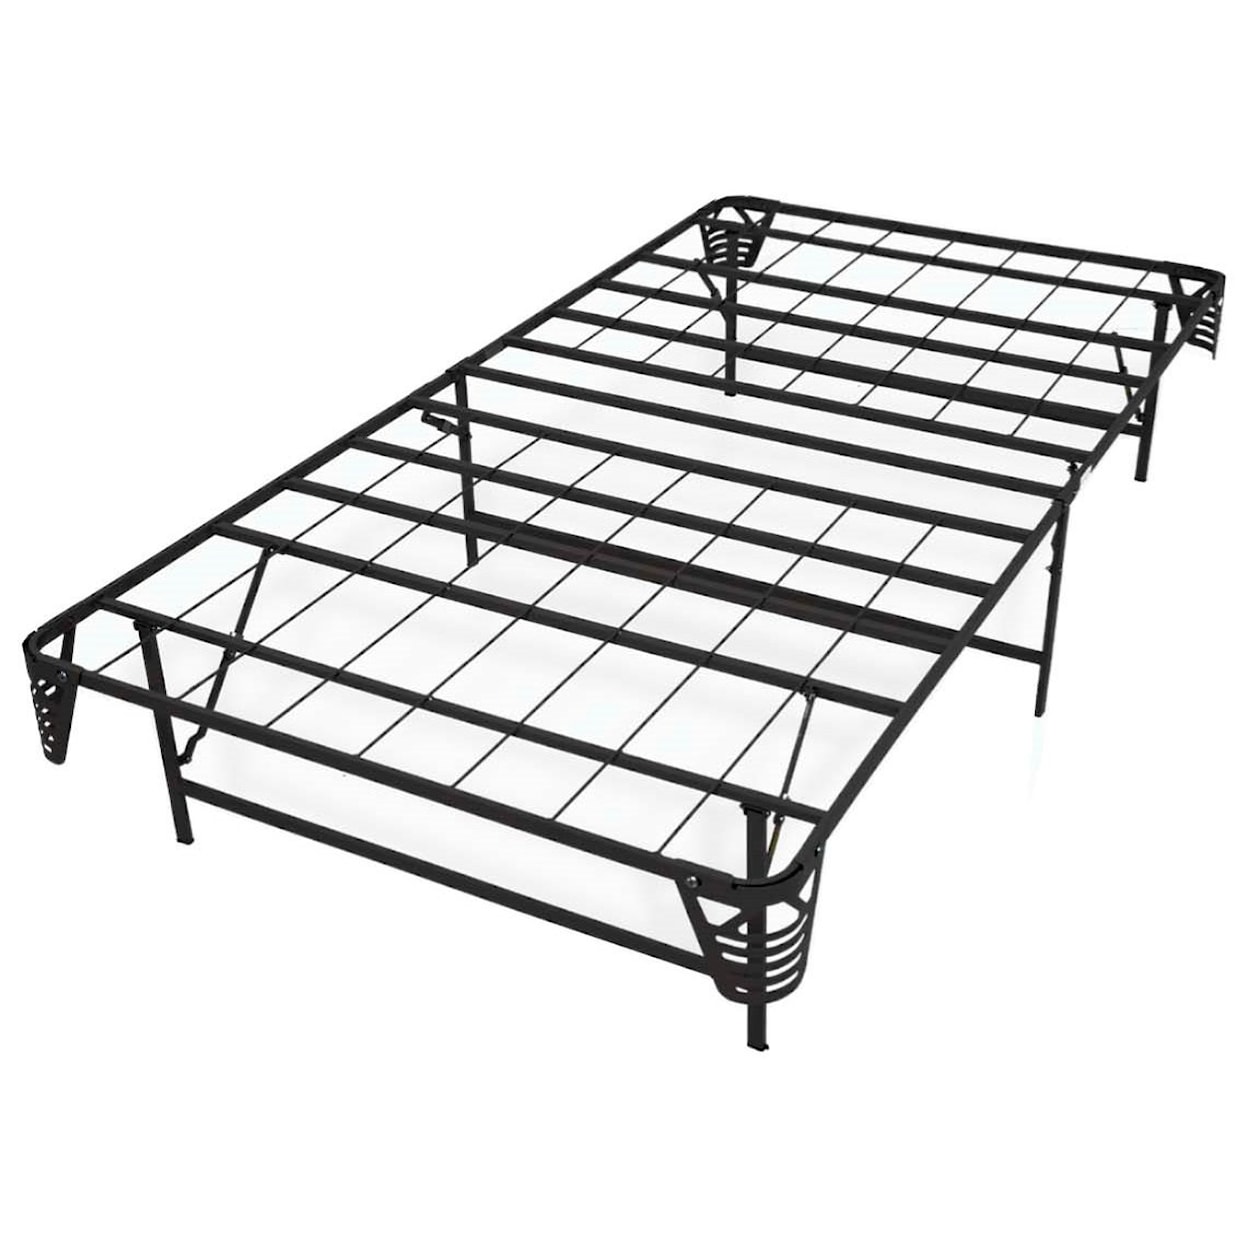 Glideaway Space Saver Bed Frame Queen Space Saver Bed Frame